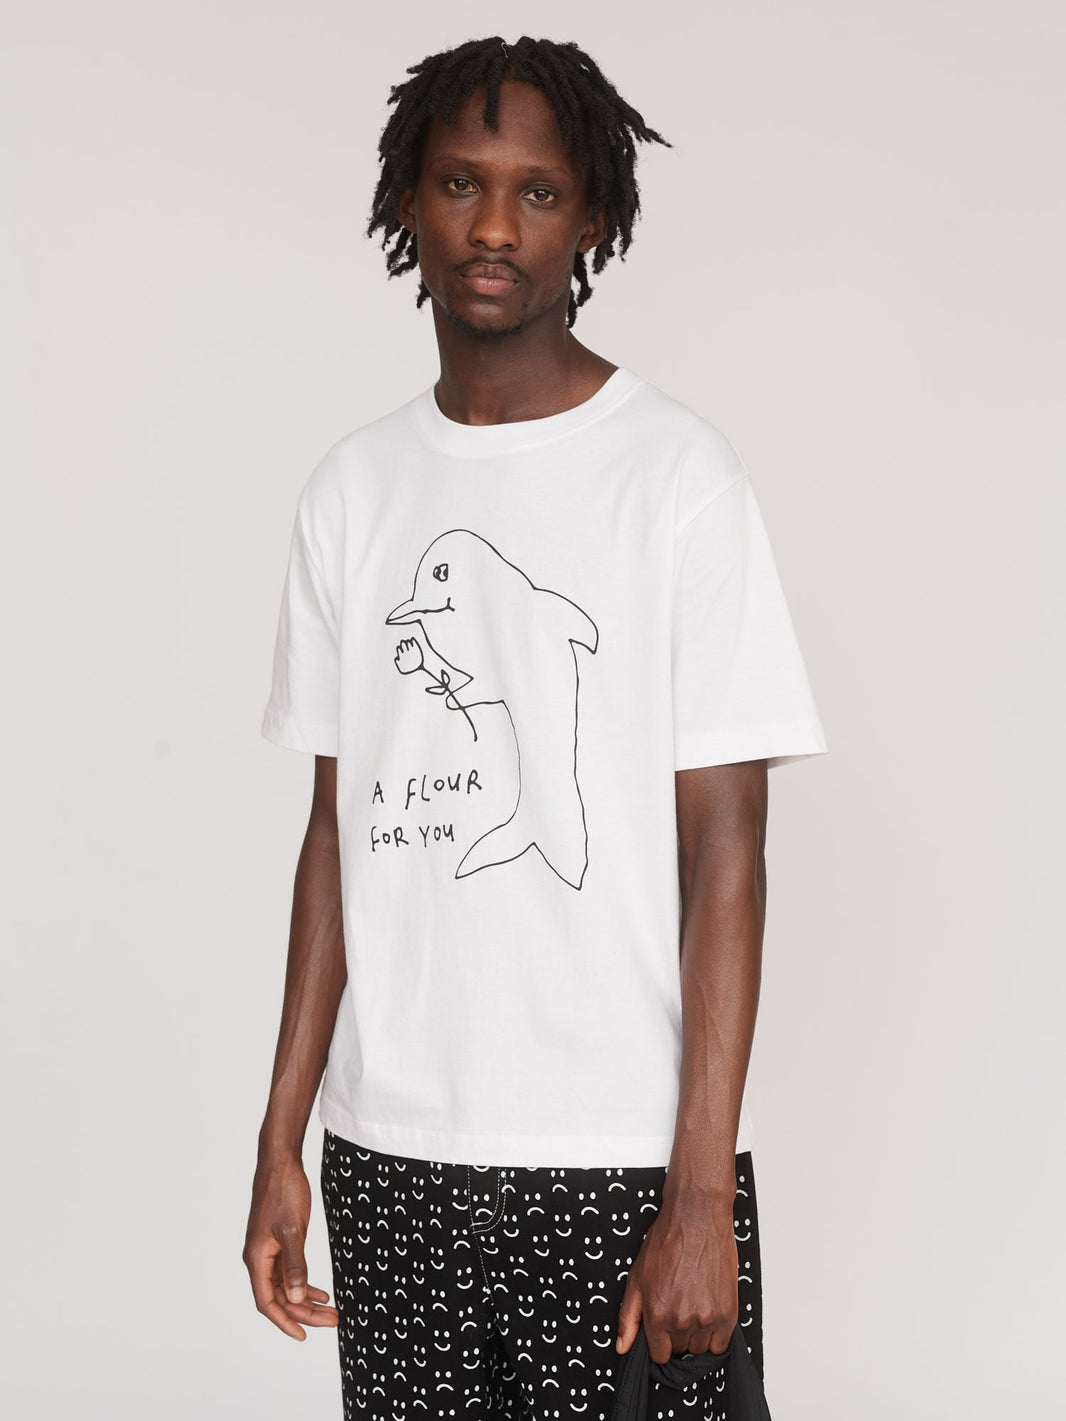 All Clothing & Accessories | Apparel For Men I Lazy Oaf